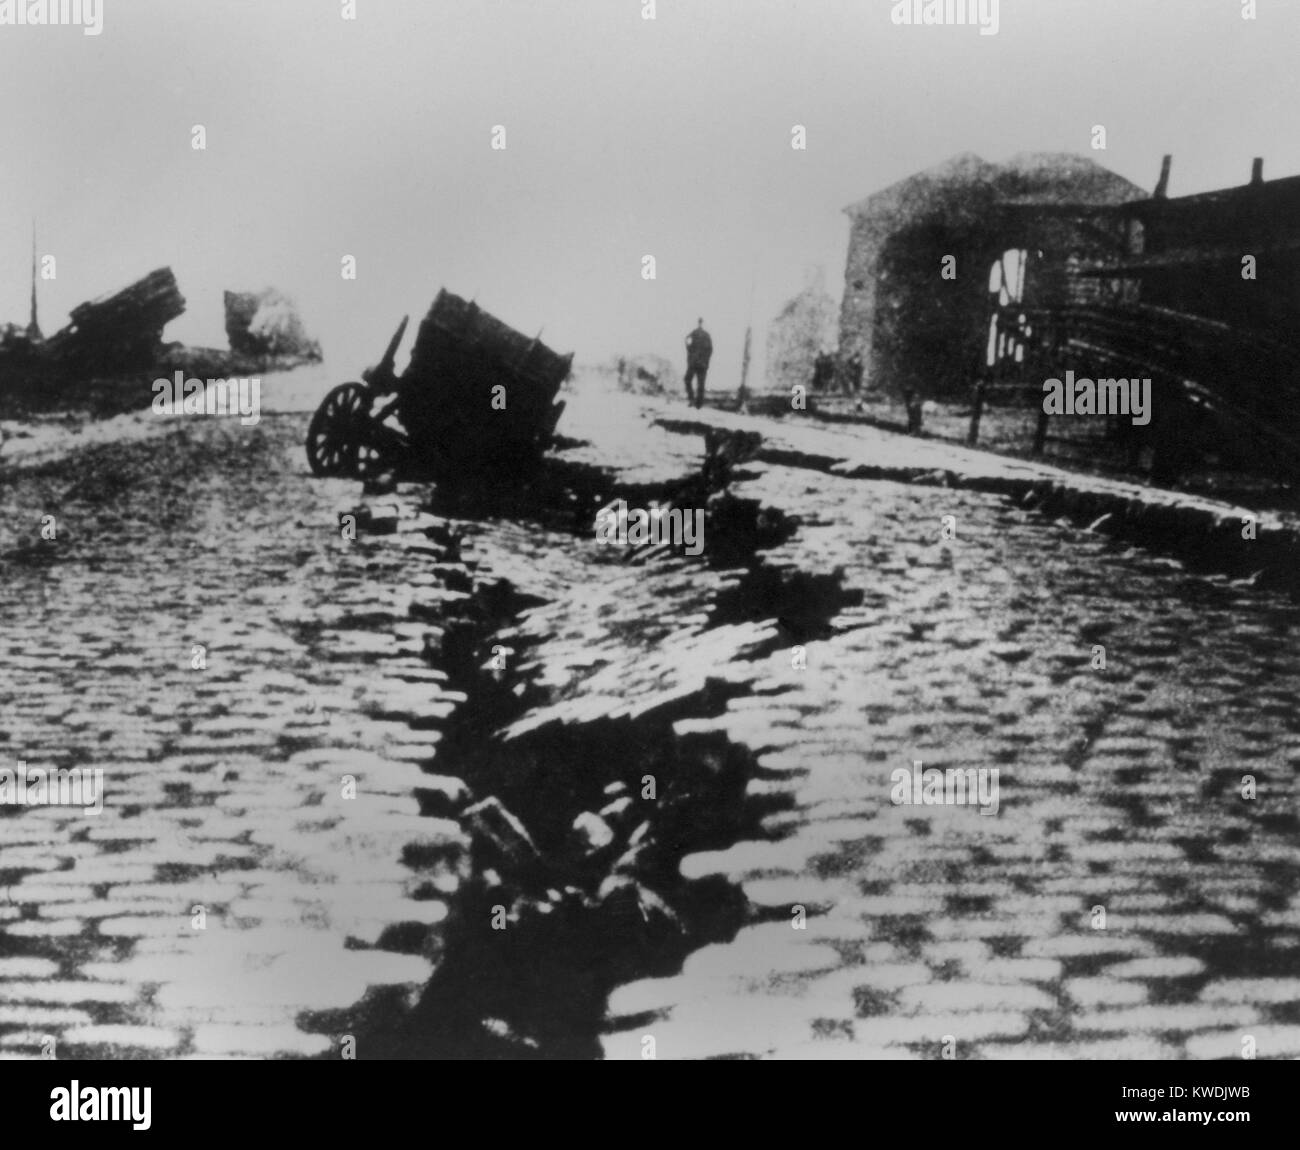 Fissure and sink in East Street near Ferry Building after the San Francisco Earthquake, 1906. A carriage fell into cracks in roadway near the waterfront caused by lateral spreading in the area (BSLOC 2017 17 8) Stock Photo